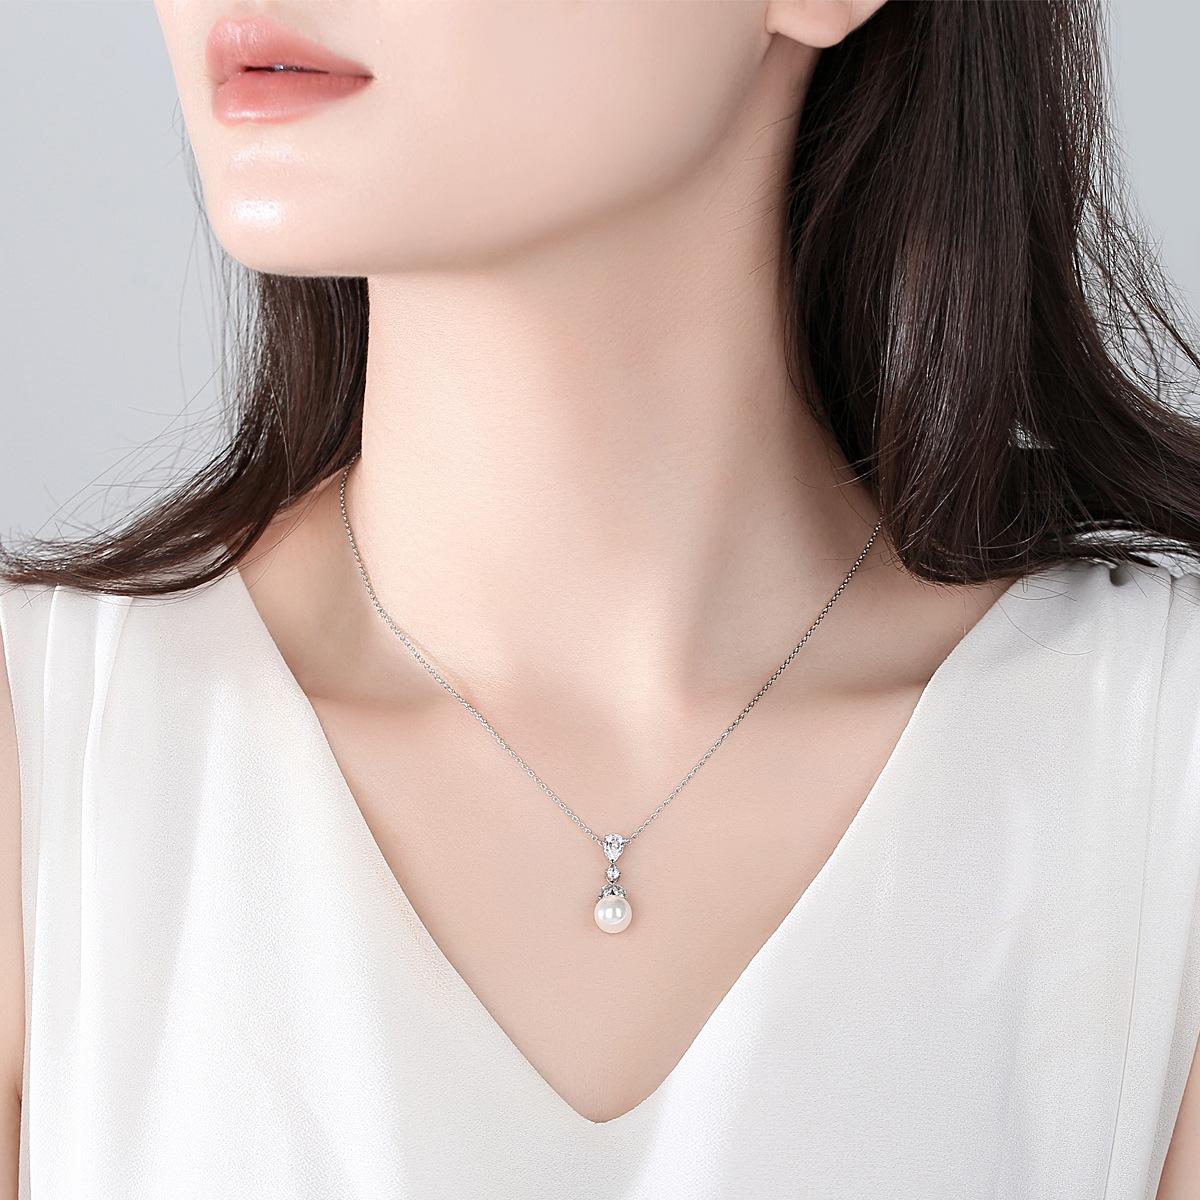 Korean style pendant sweet pearl necklace for women